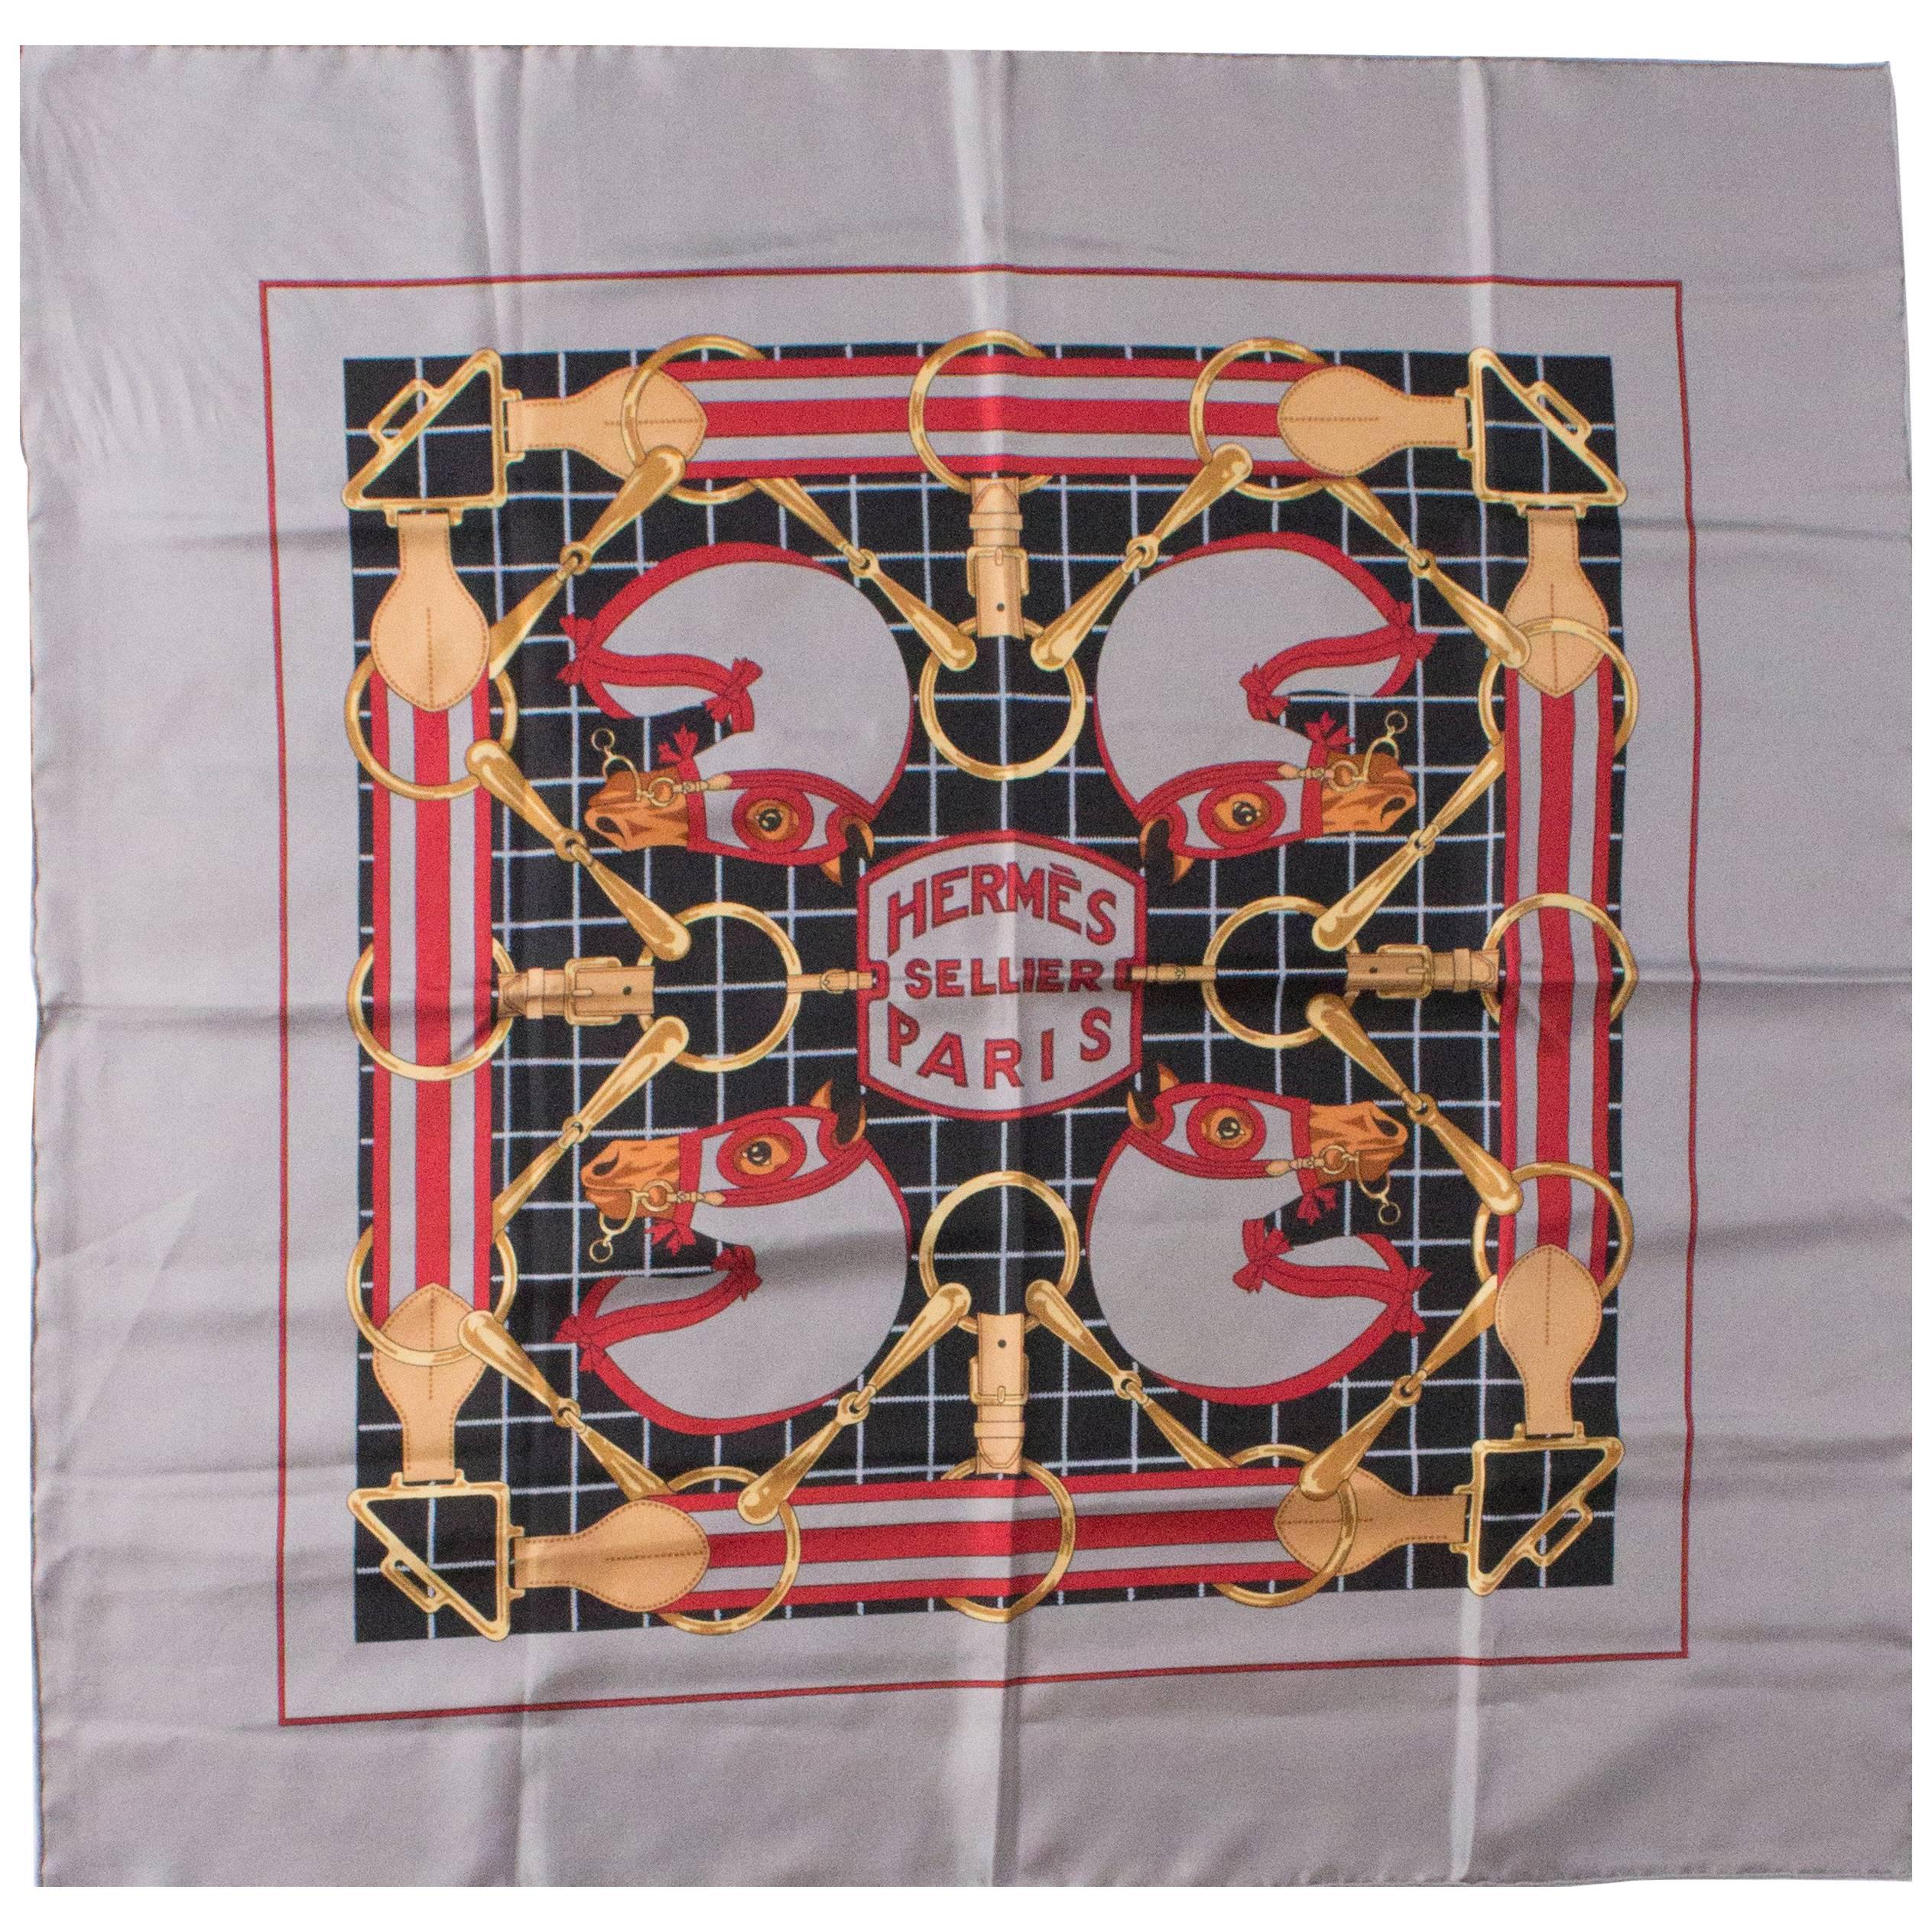 How can I tell if a Hermes scarf is vintage?